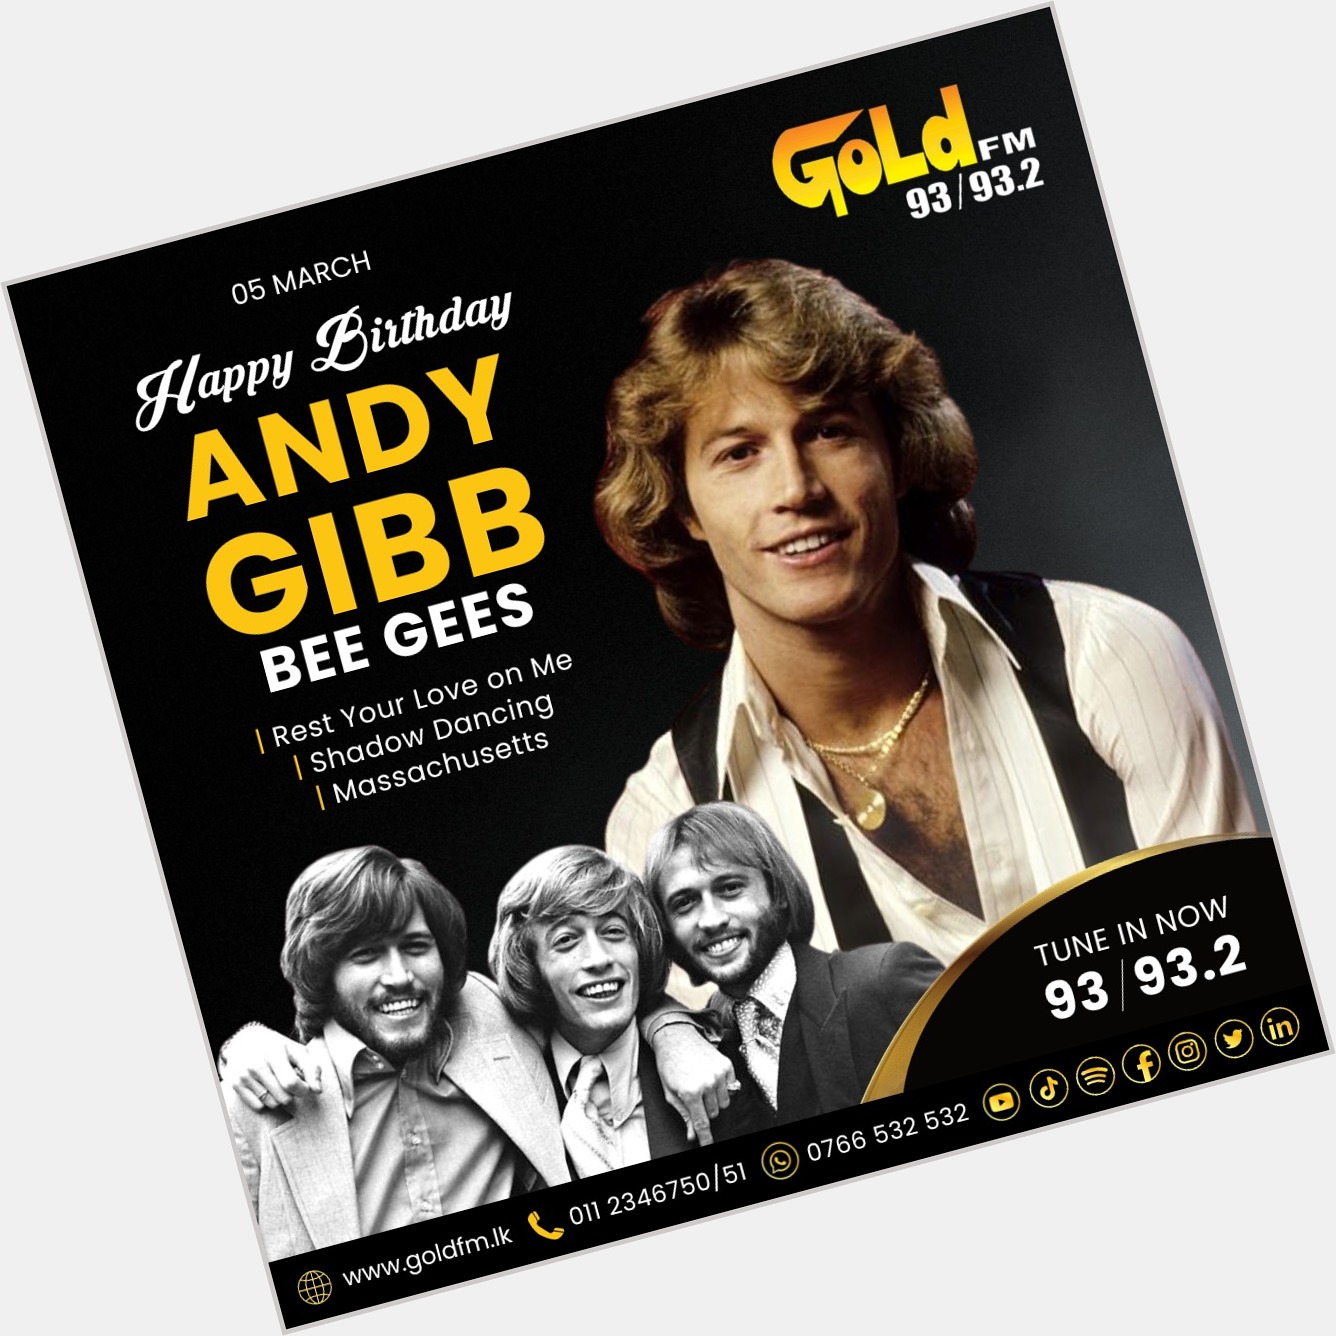 HAPPY BIRTHDAY TO ANDY GIBB TUNE IN NOW 93 / 93.2 Island wide      